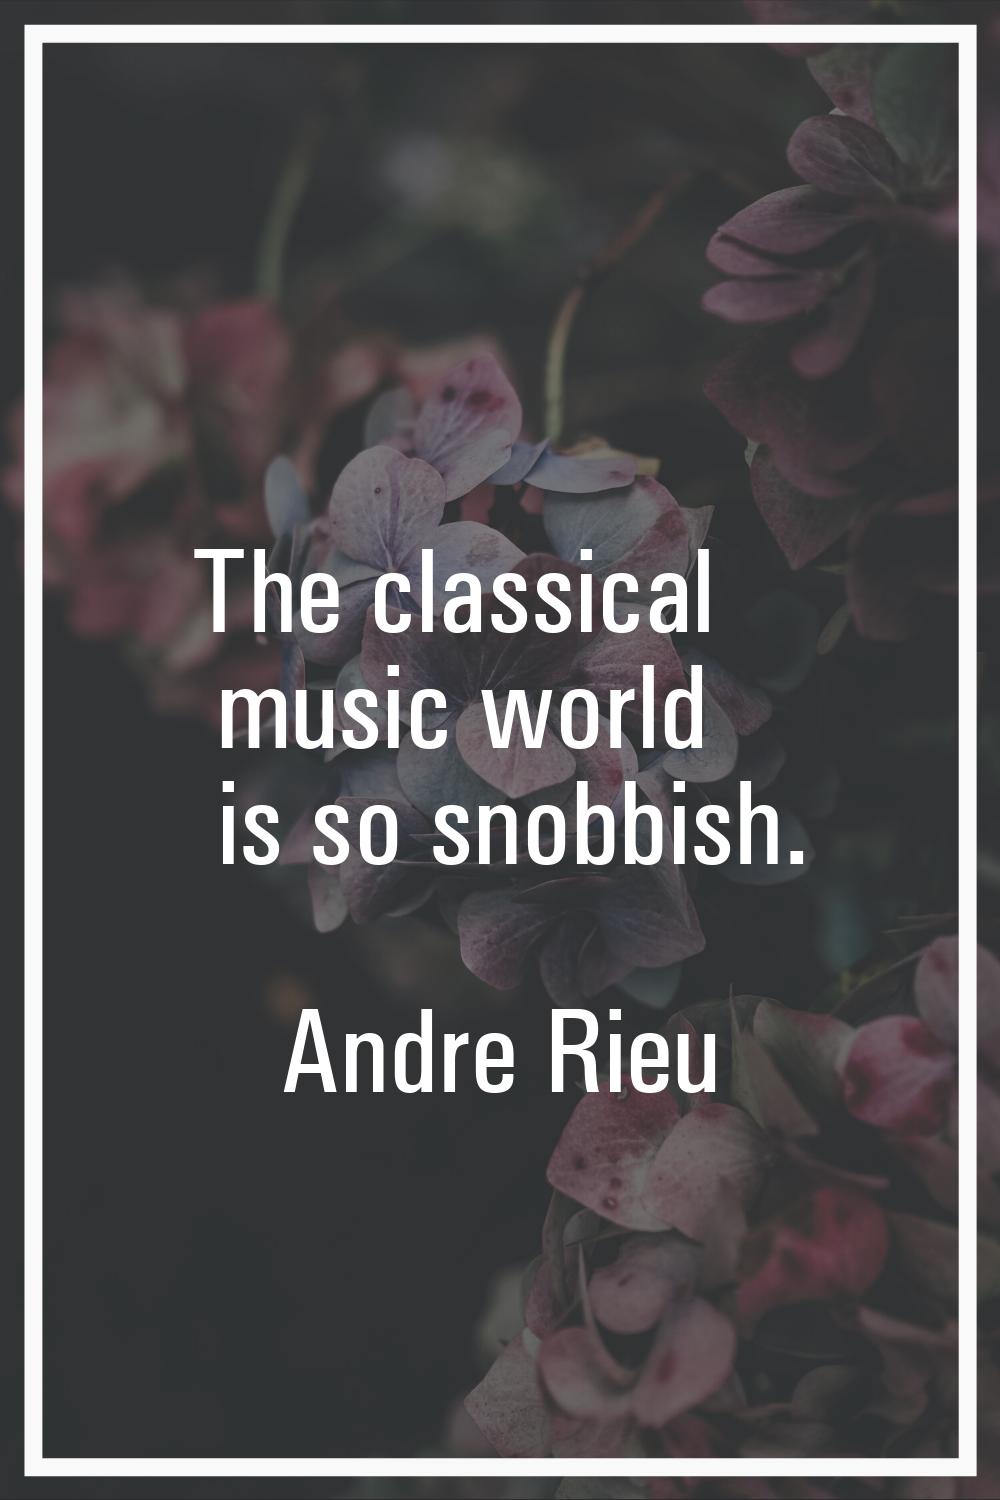 The classical music world is so snobbish.